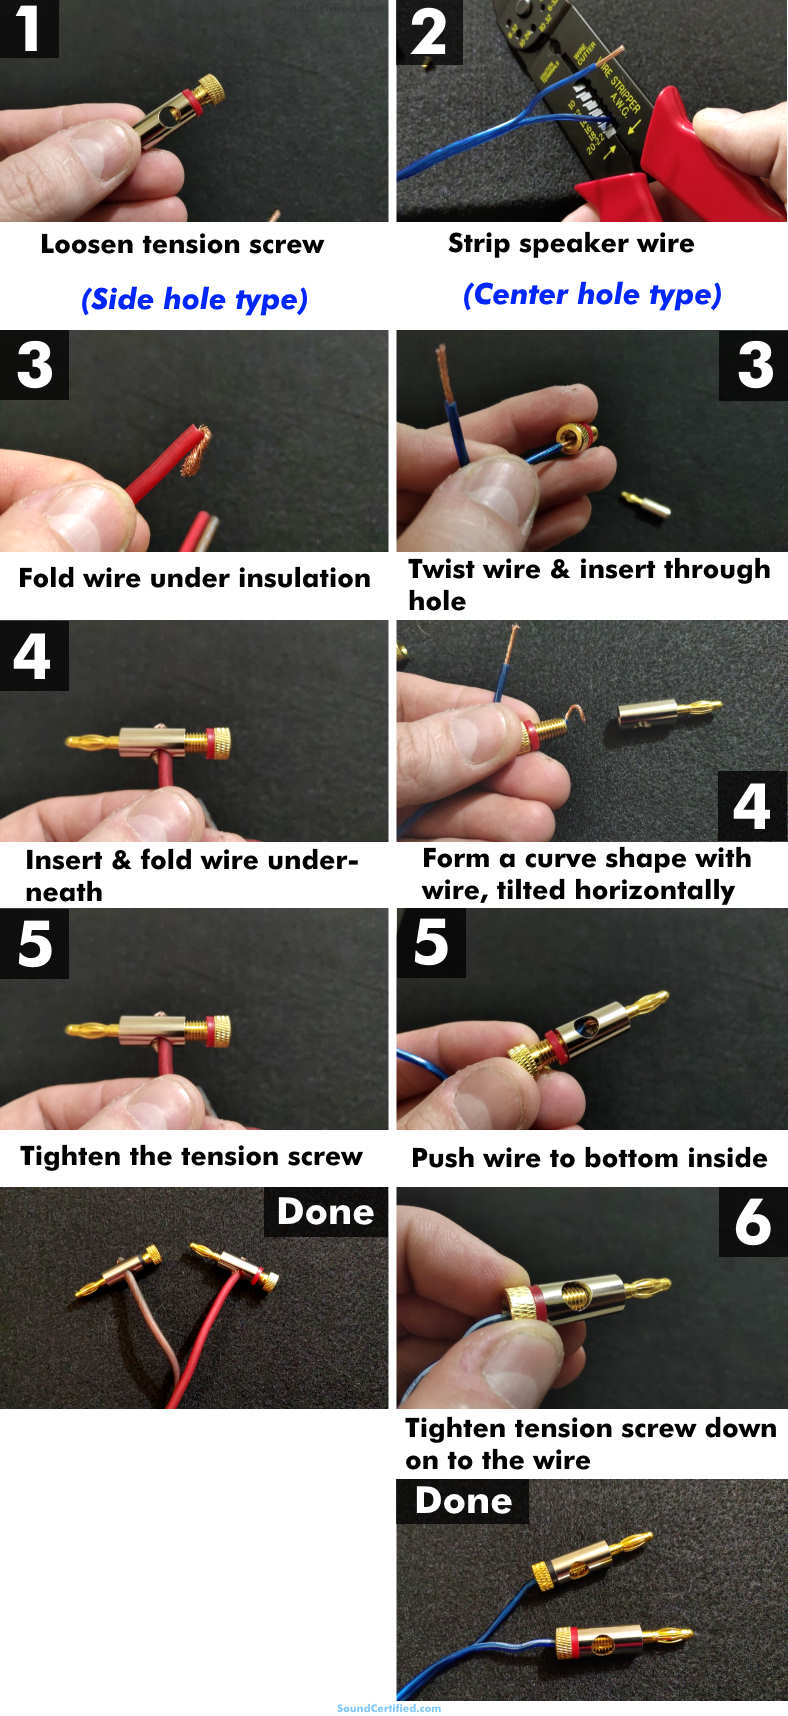 Image with instructions for how to connect speaker wire to banana plugs with binding post style